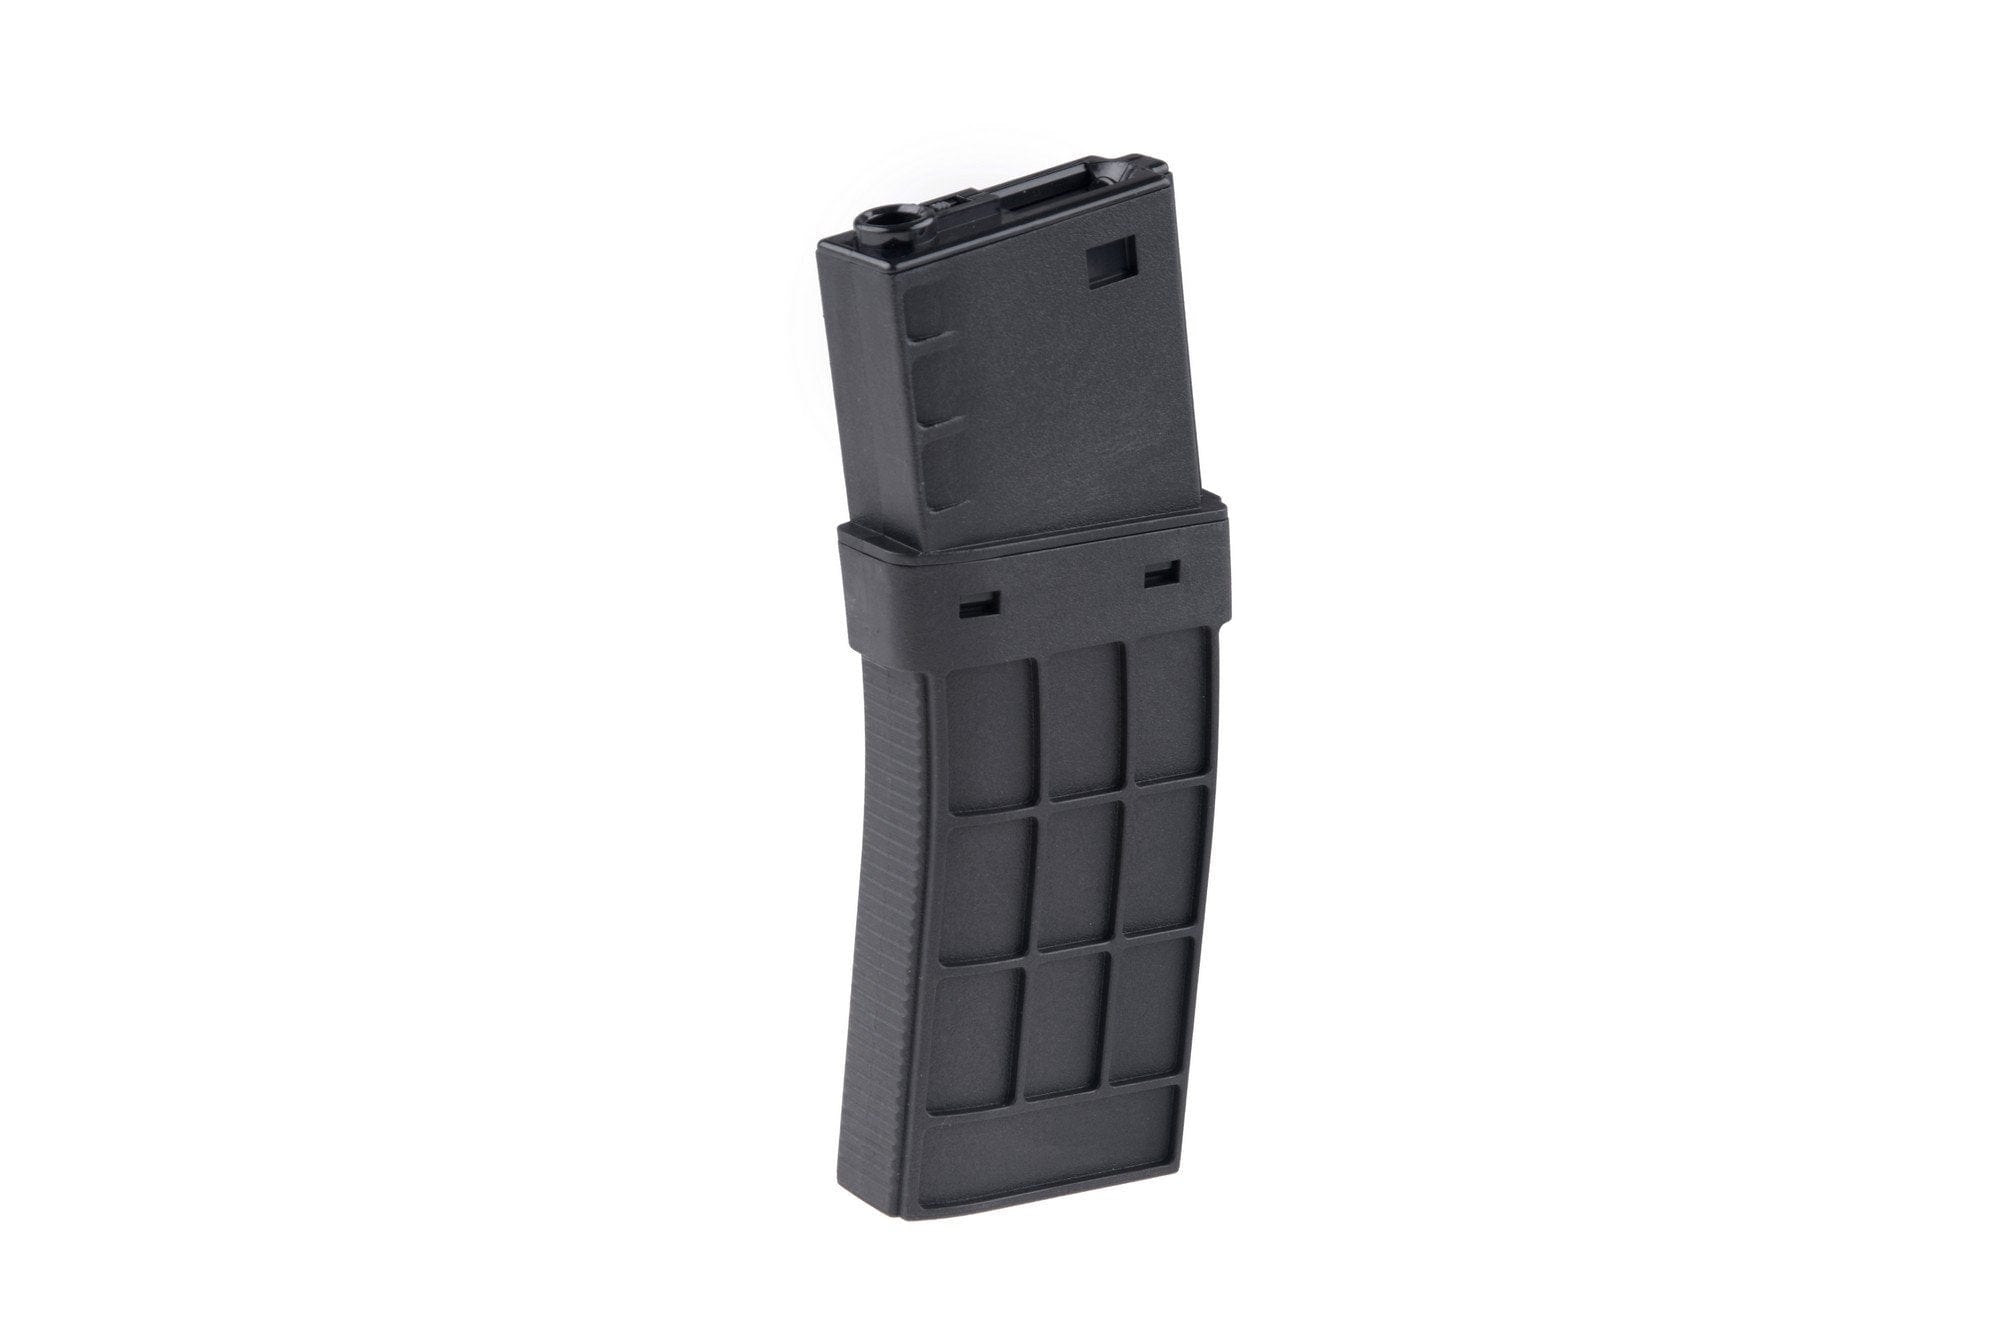 450BBs hi-cap magazine for M4/M16 by CYMA on Airsoft Mania Europe